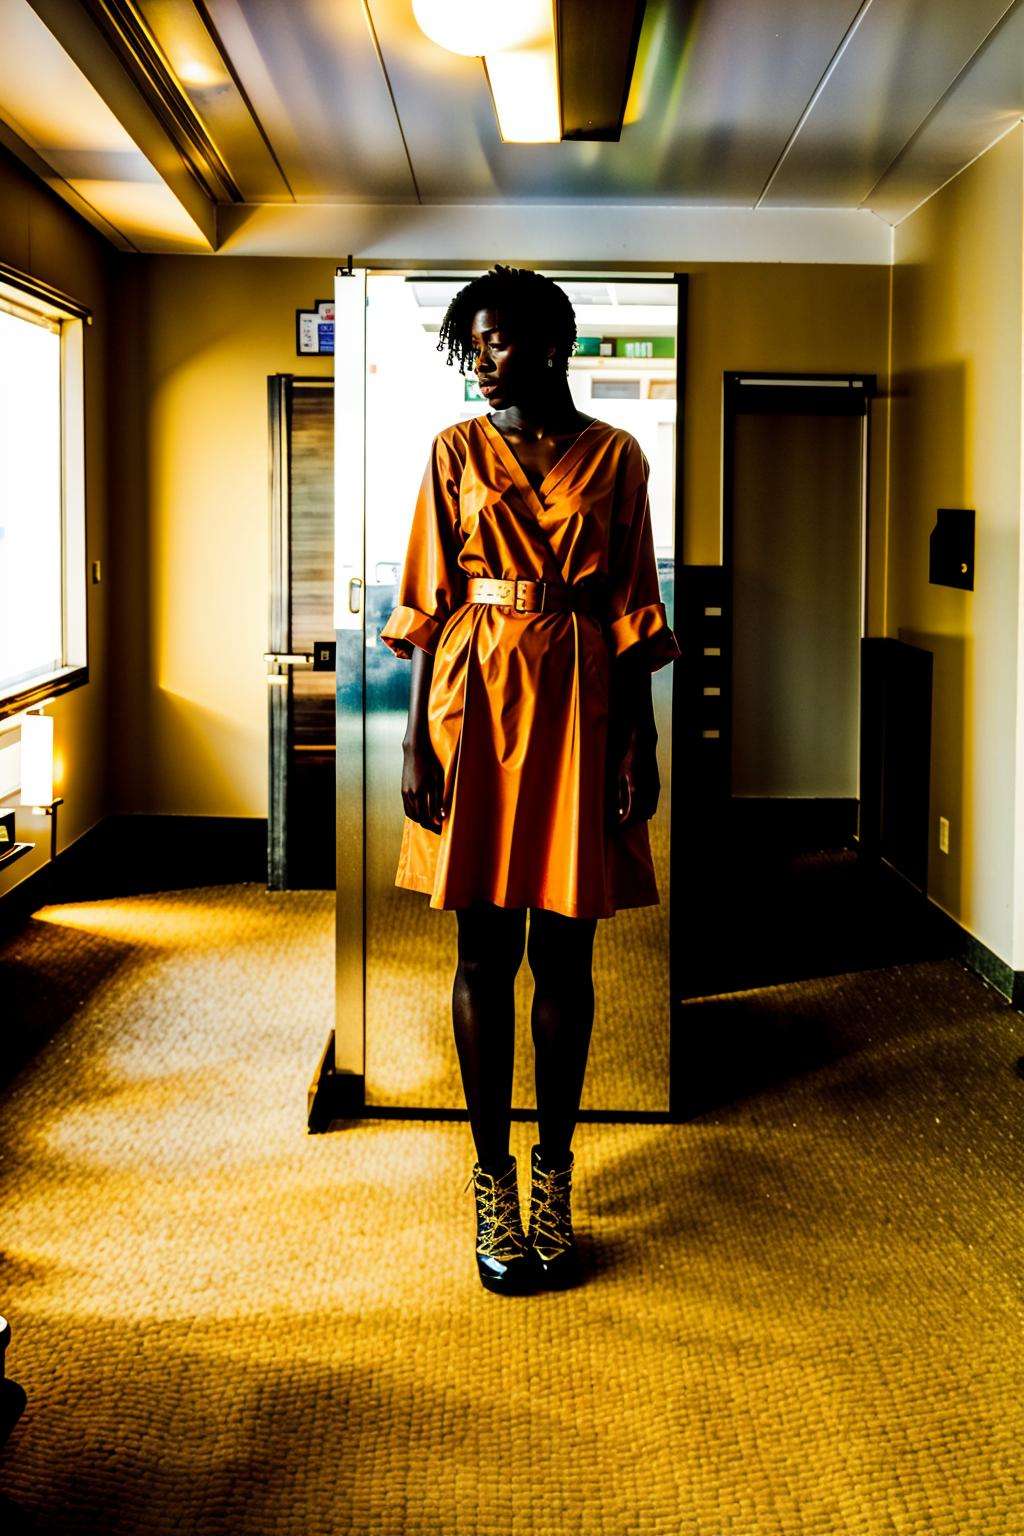 a woman in an orange dress is standing in a room